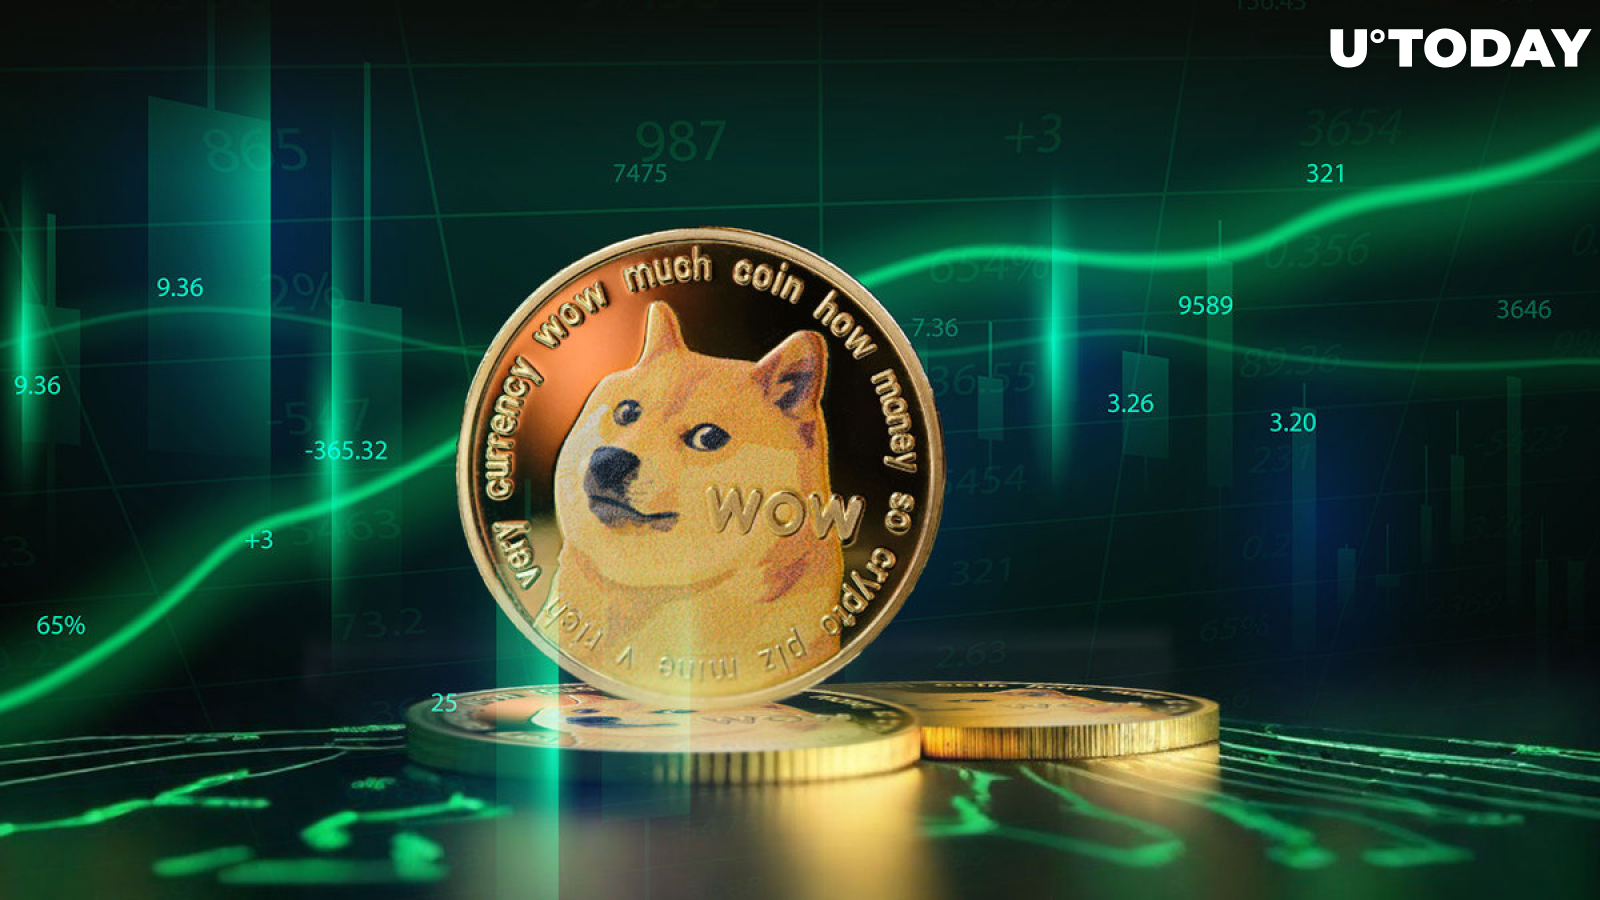 200 Million DOGE: Here’s What Dogecoin Whales Are Doing